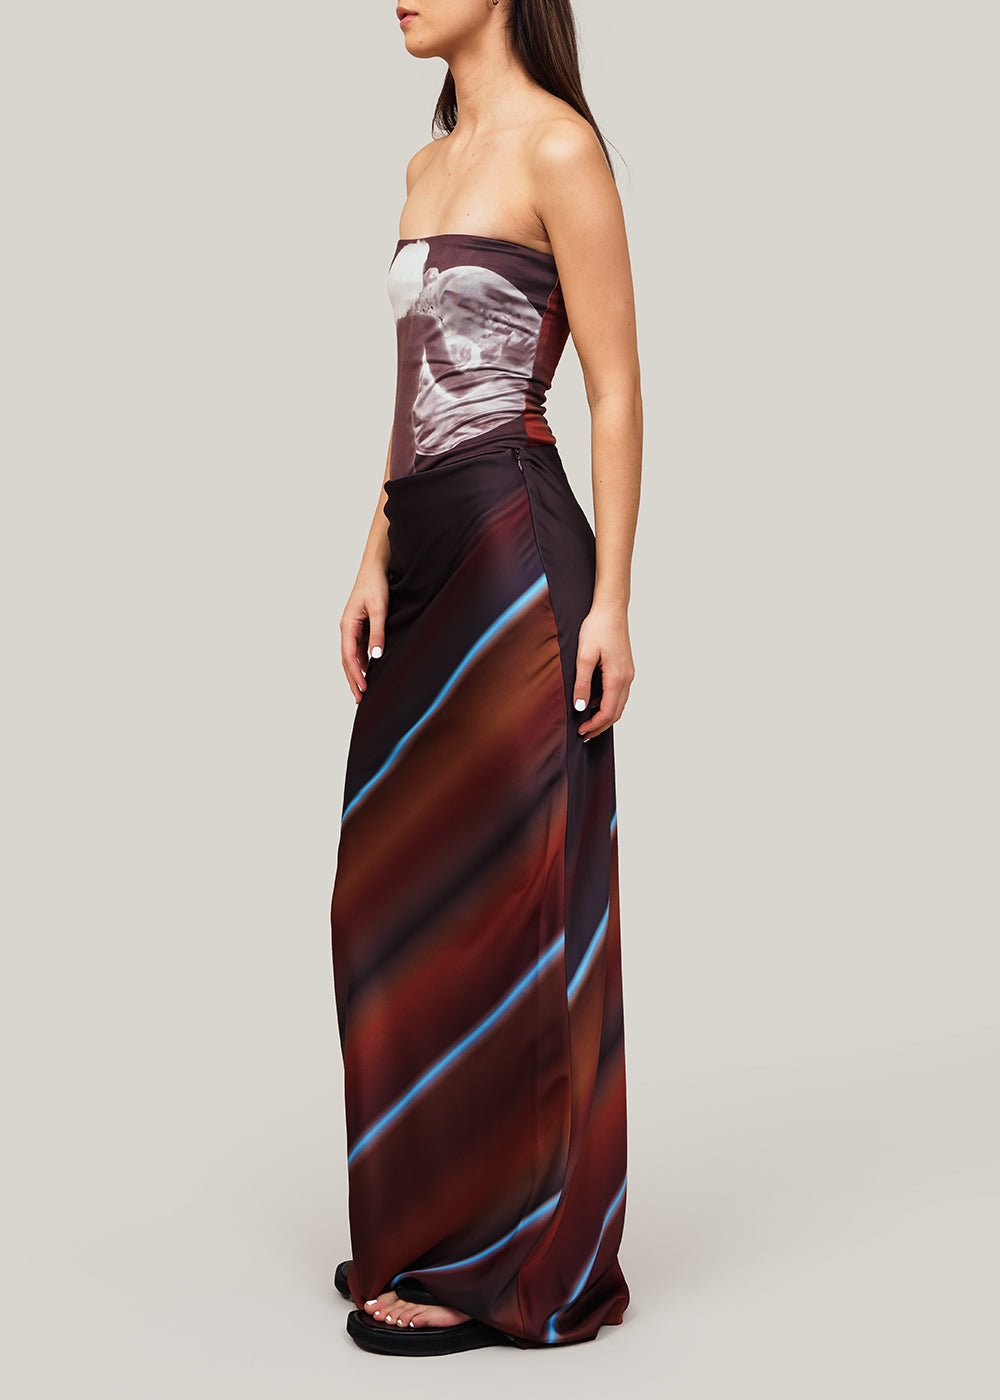 ELLISS Surreal Stripe Silky Maxi Skirt - New Classics Studios Sustainable Ethical Fashion Canada